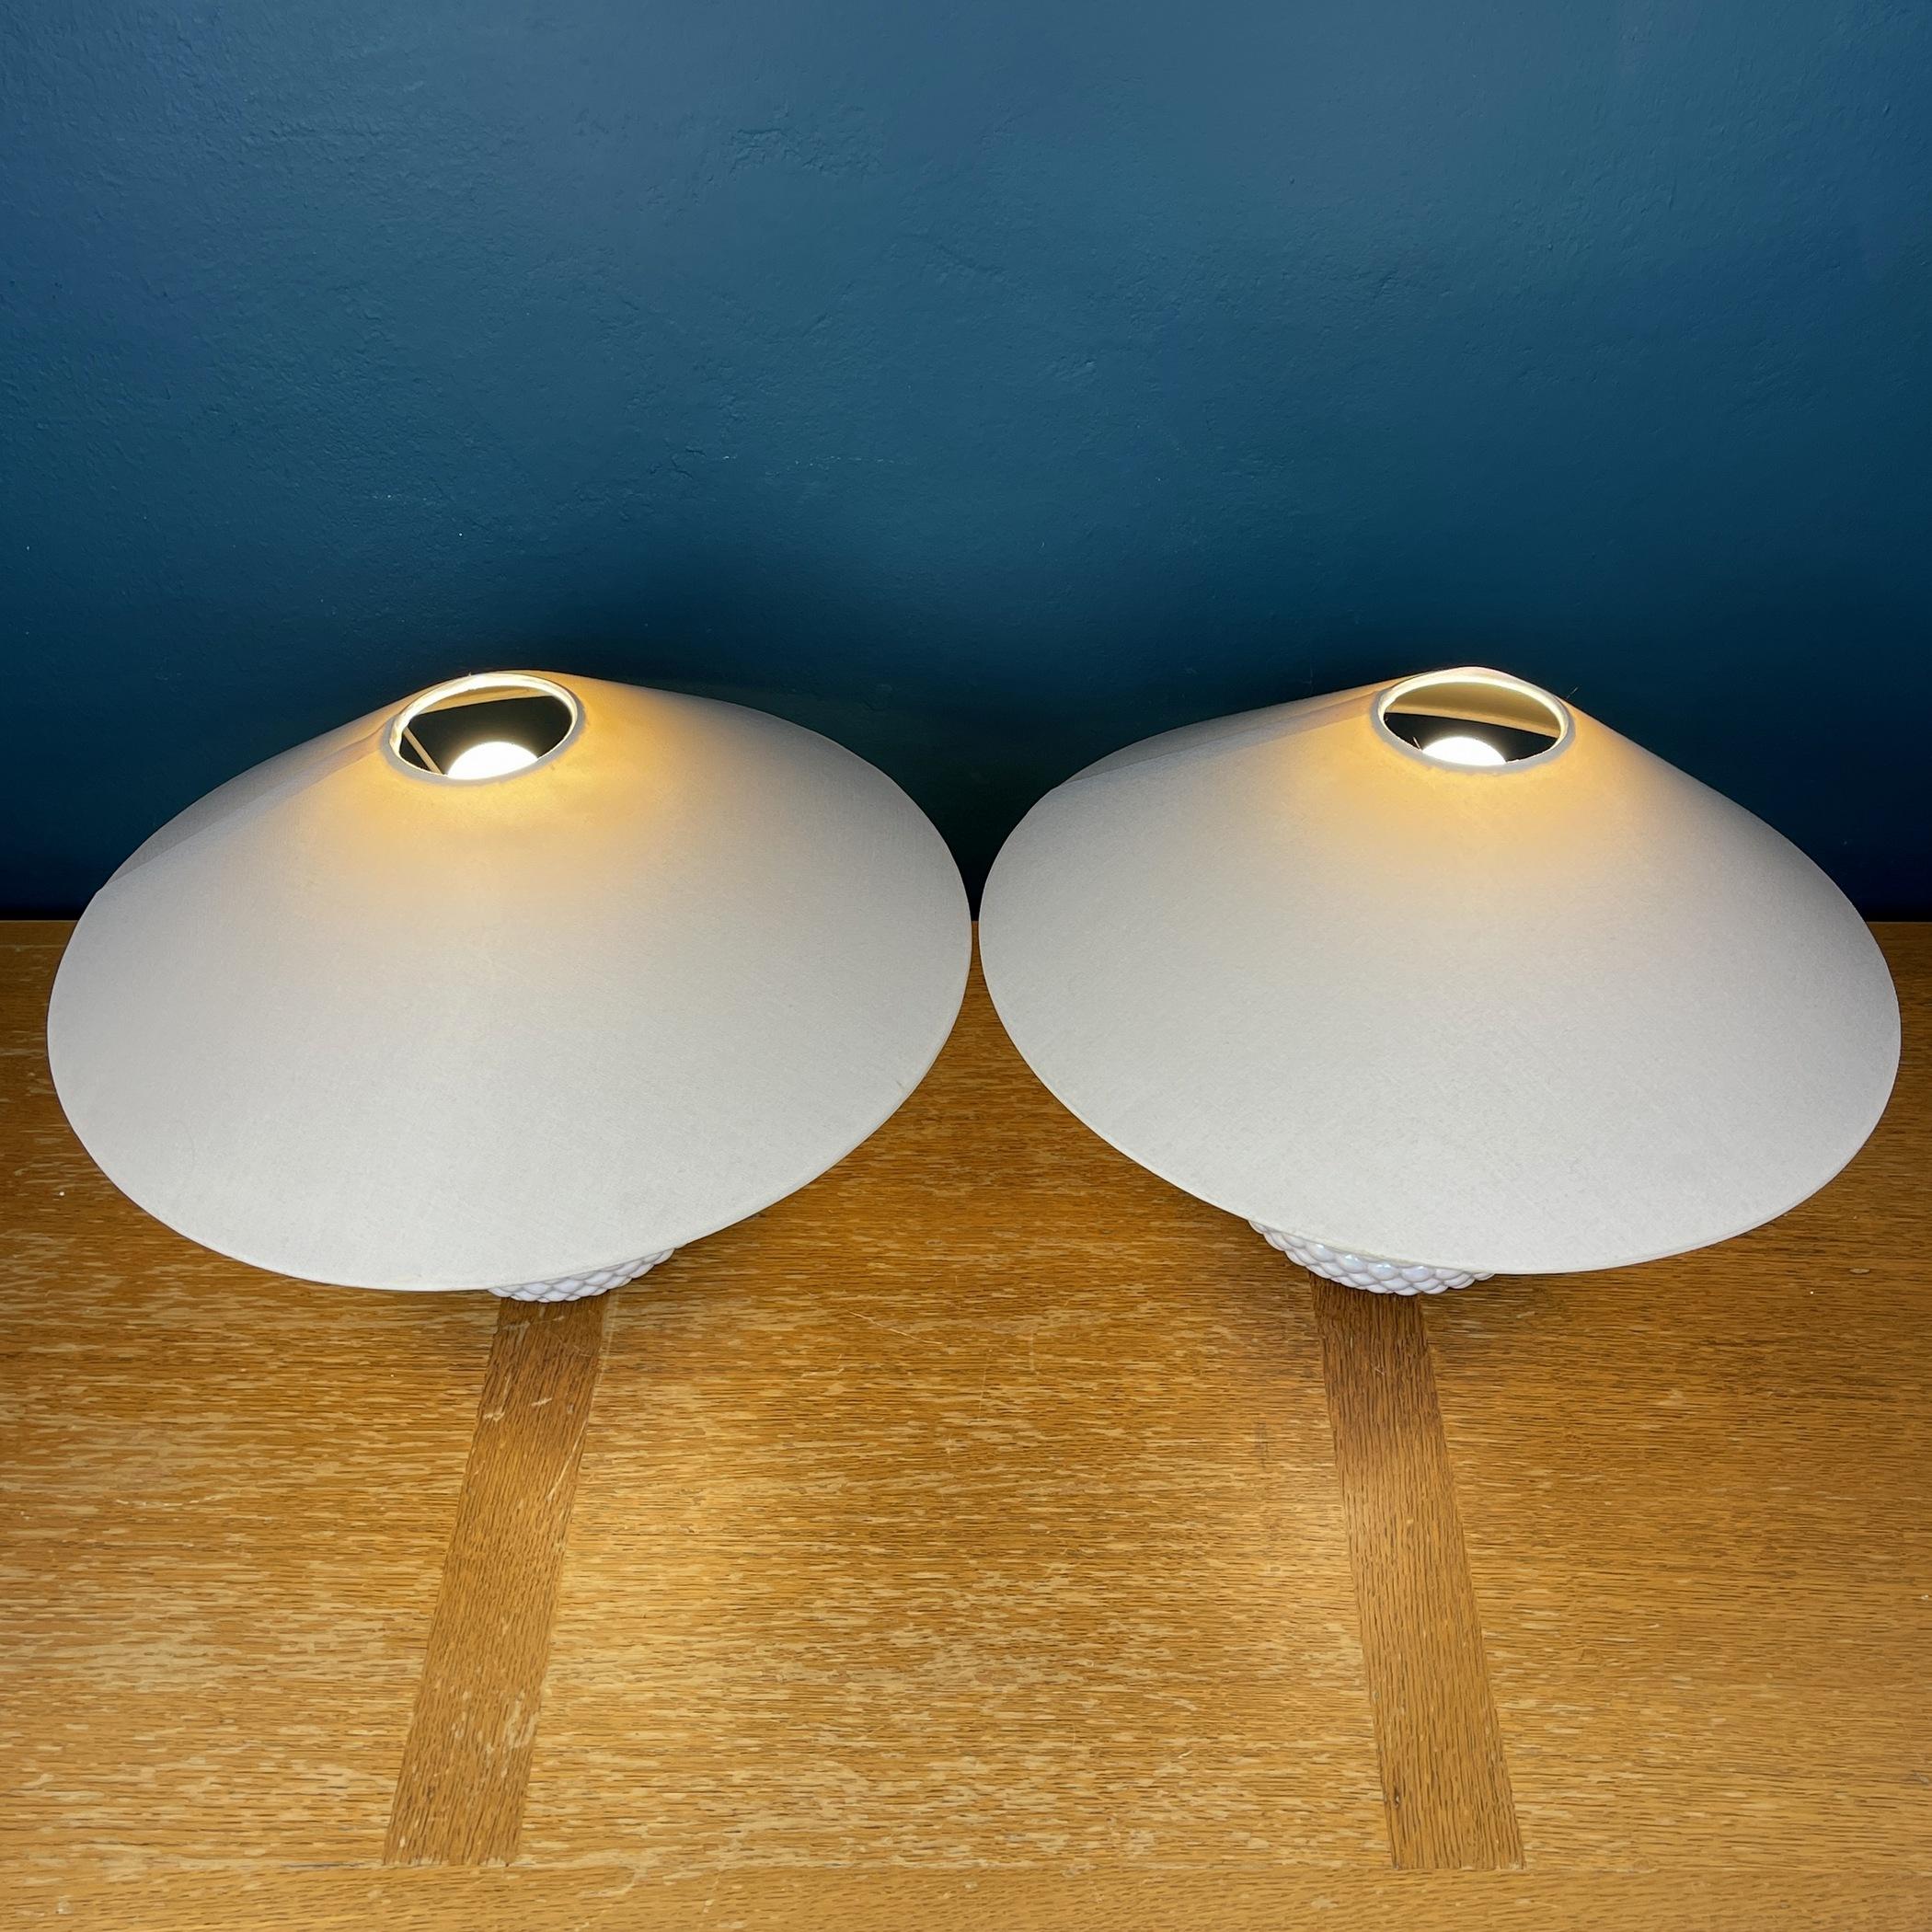 Pair of Ceramic Table Lamps, Italy, 1970s For Sale 6